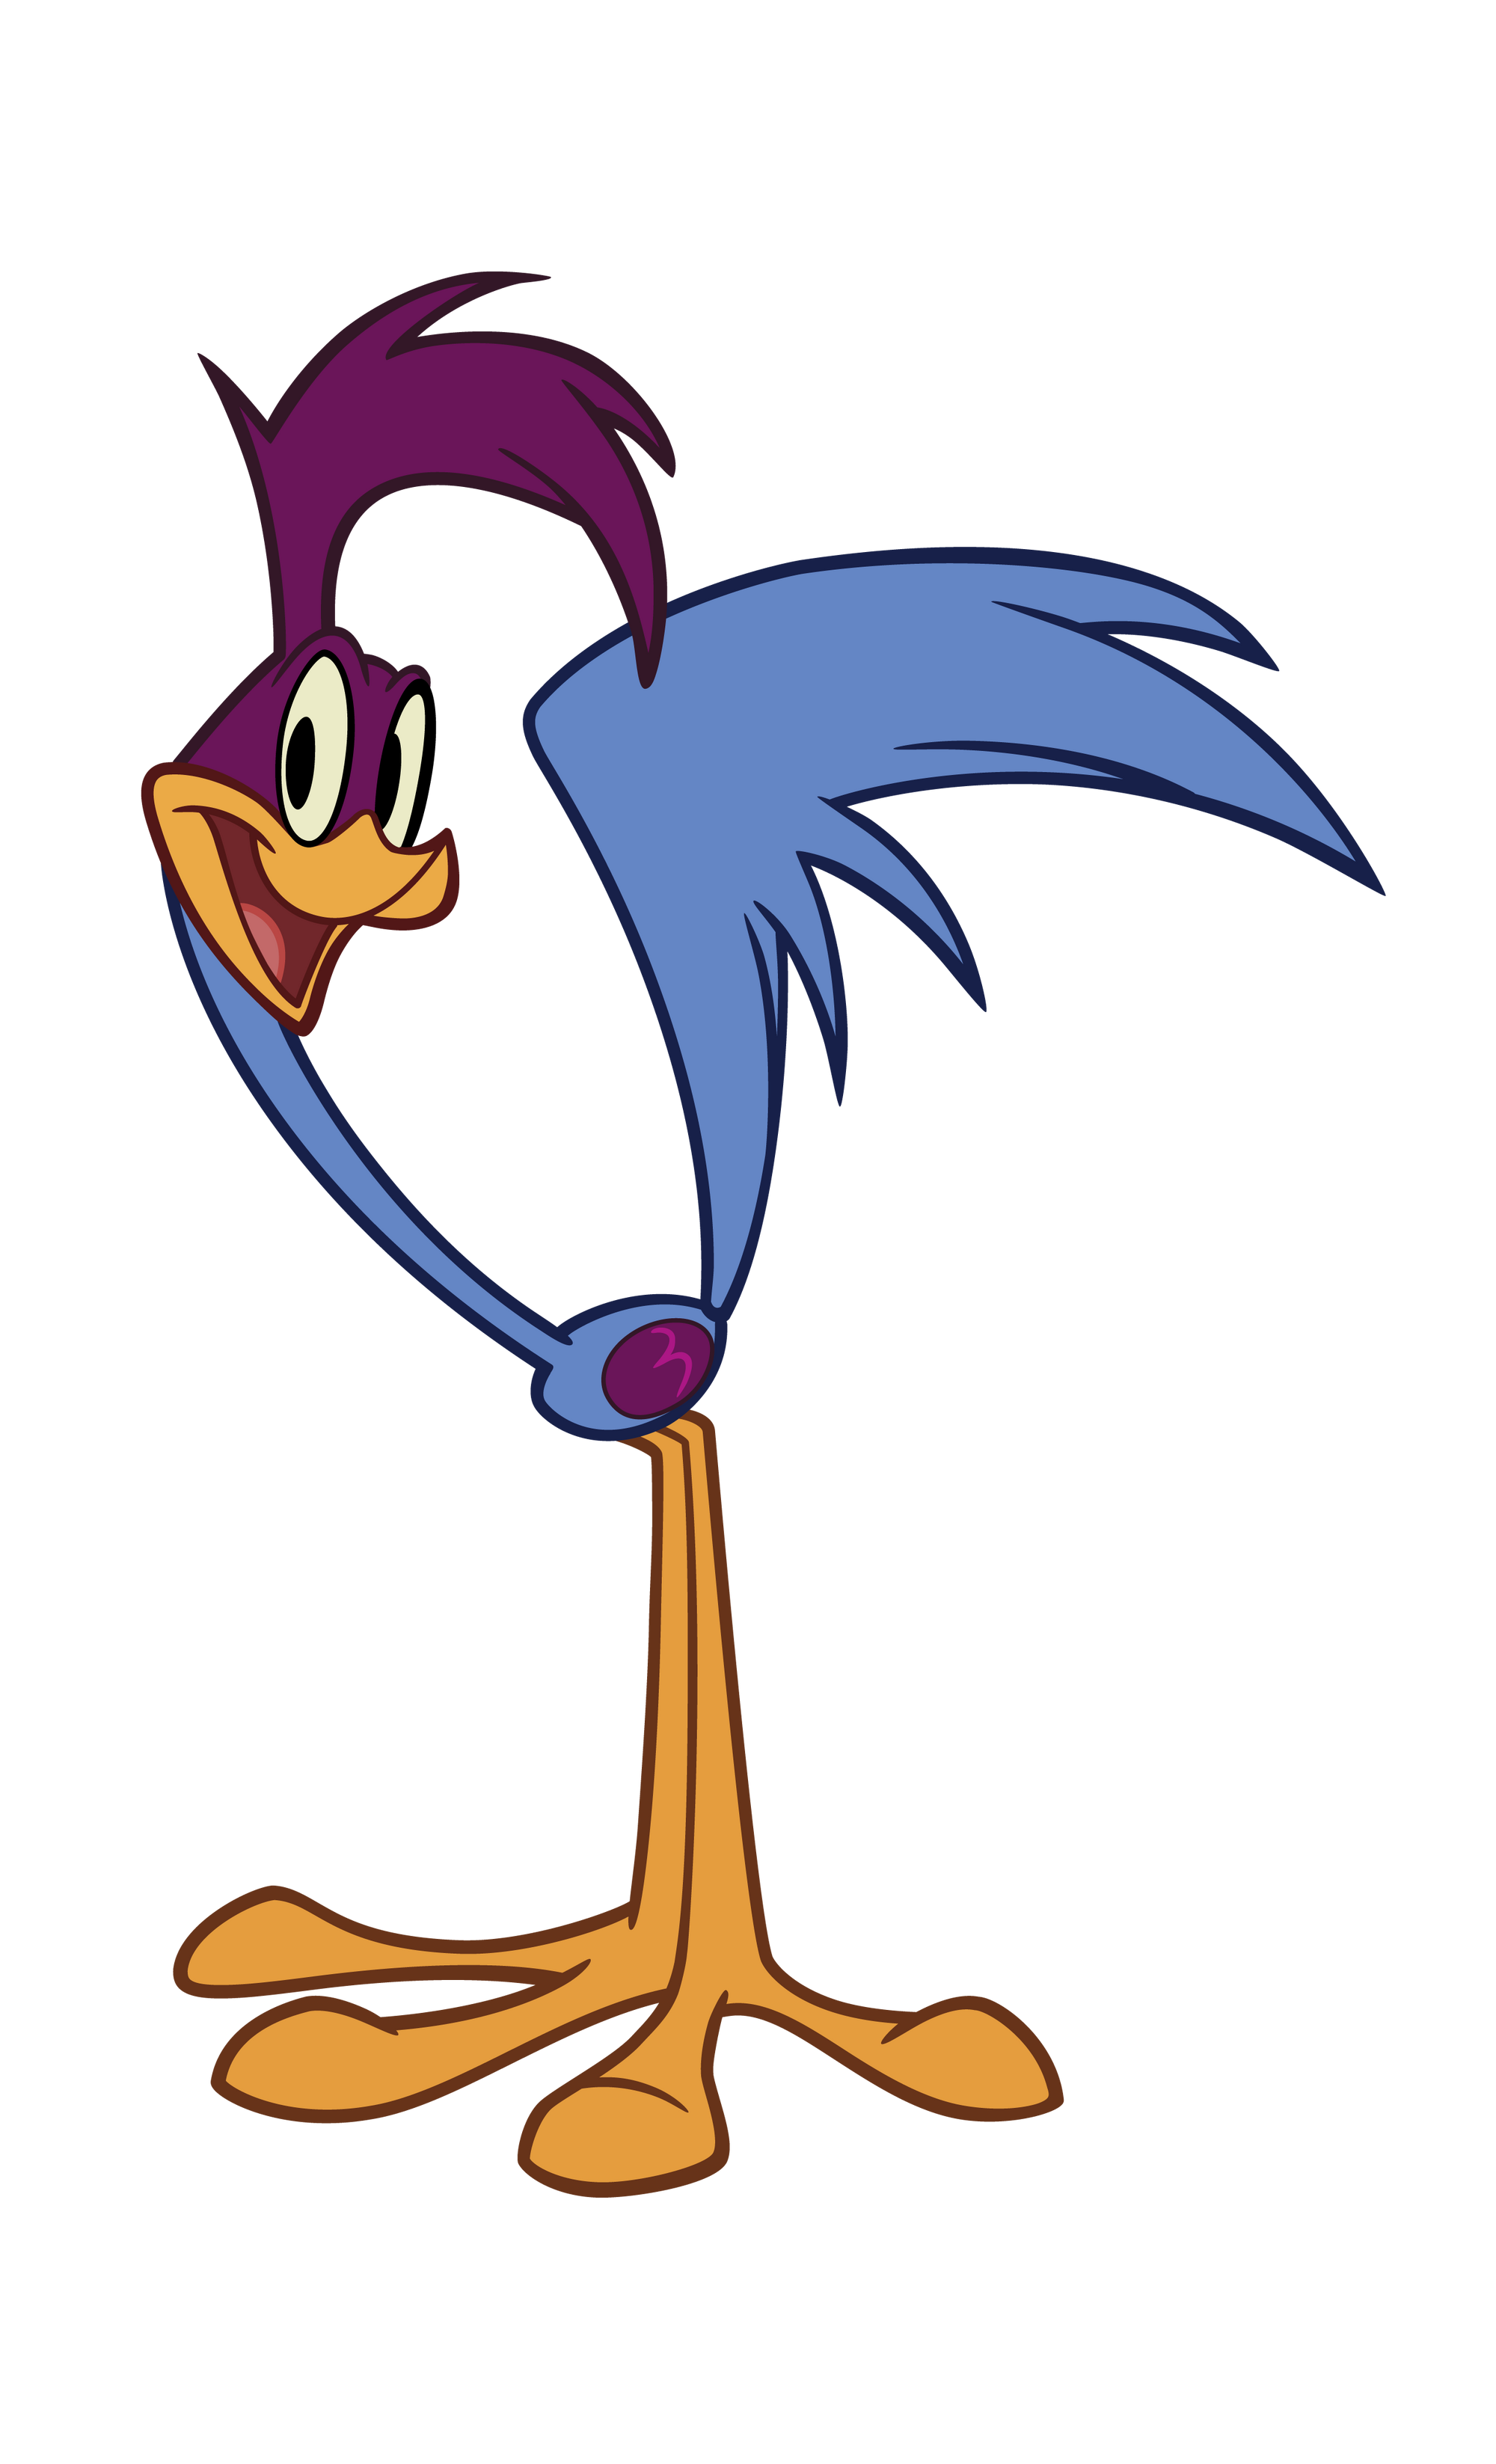 Road Runner | The Looney Tunes Show Wiki | Fandom powered by Wikia